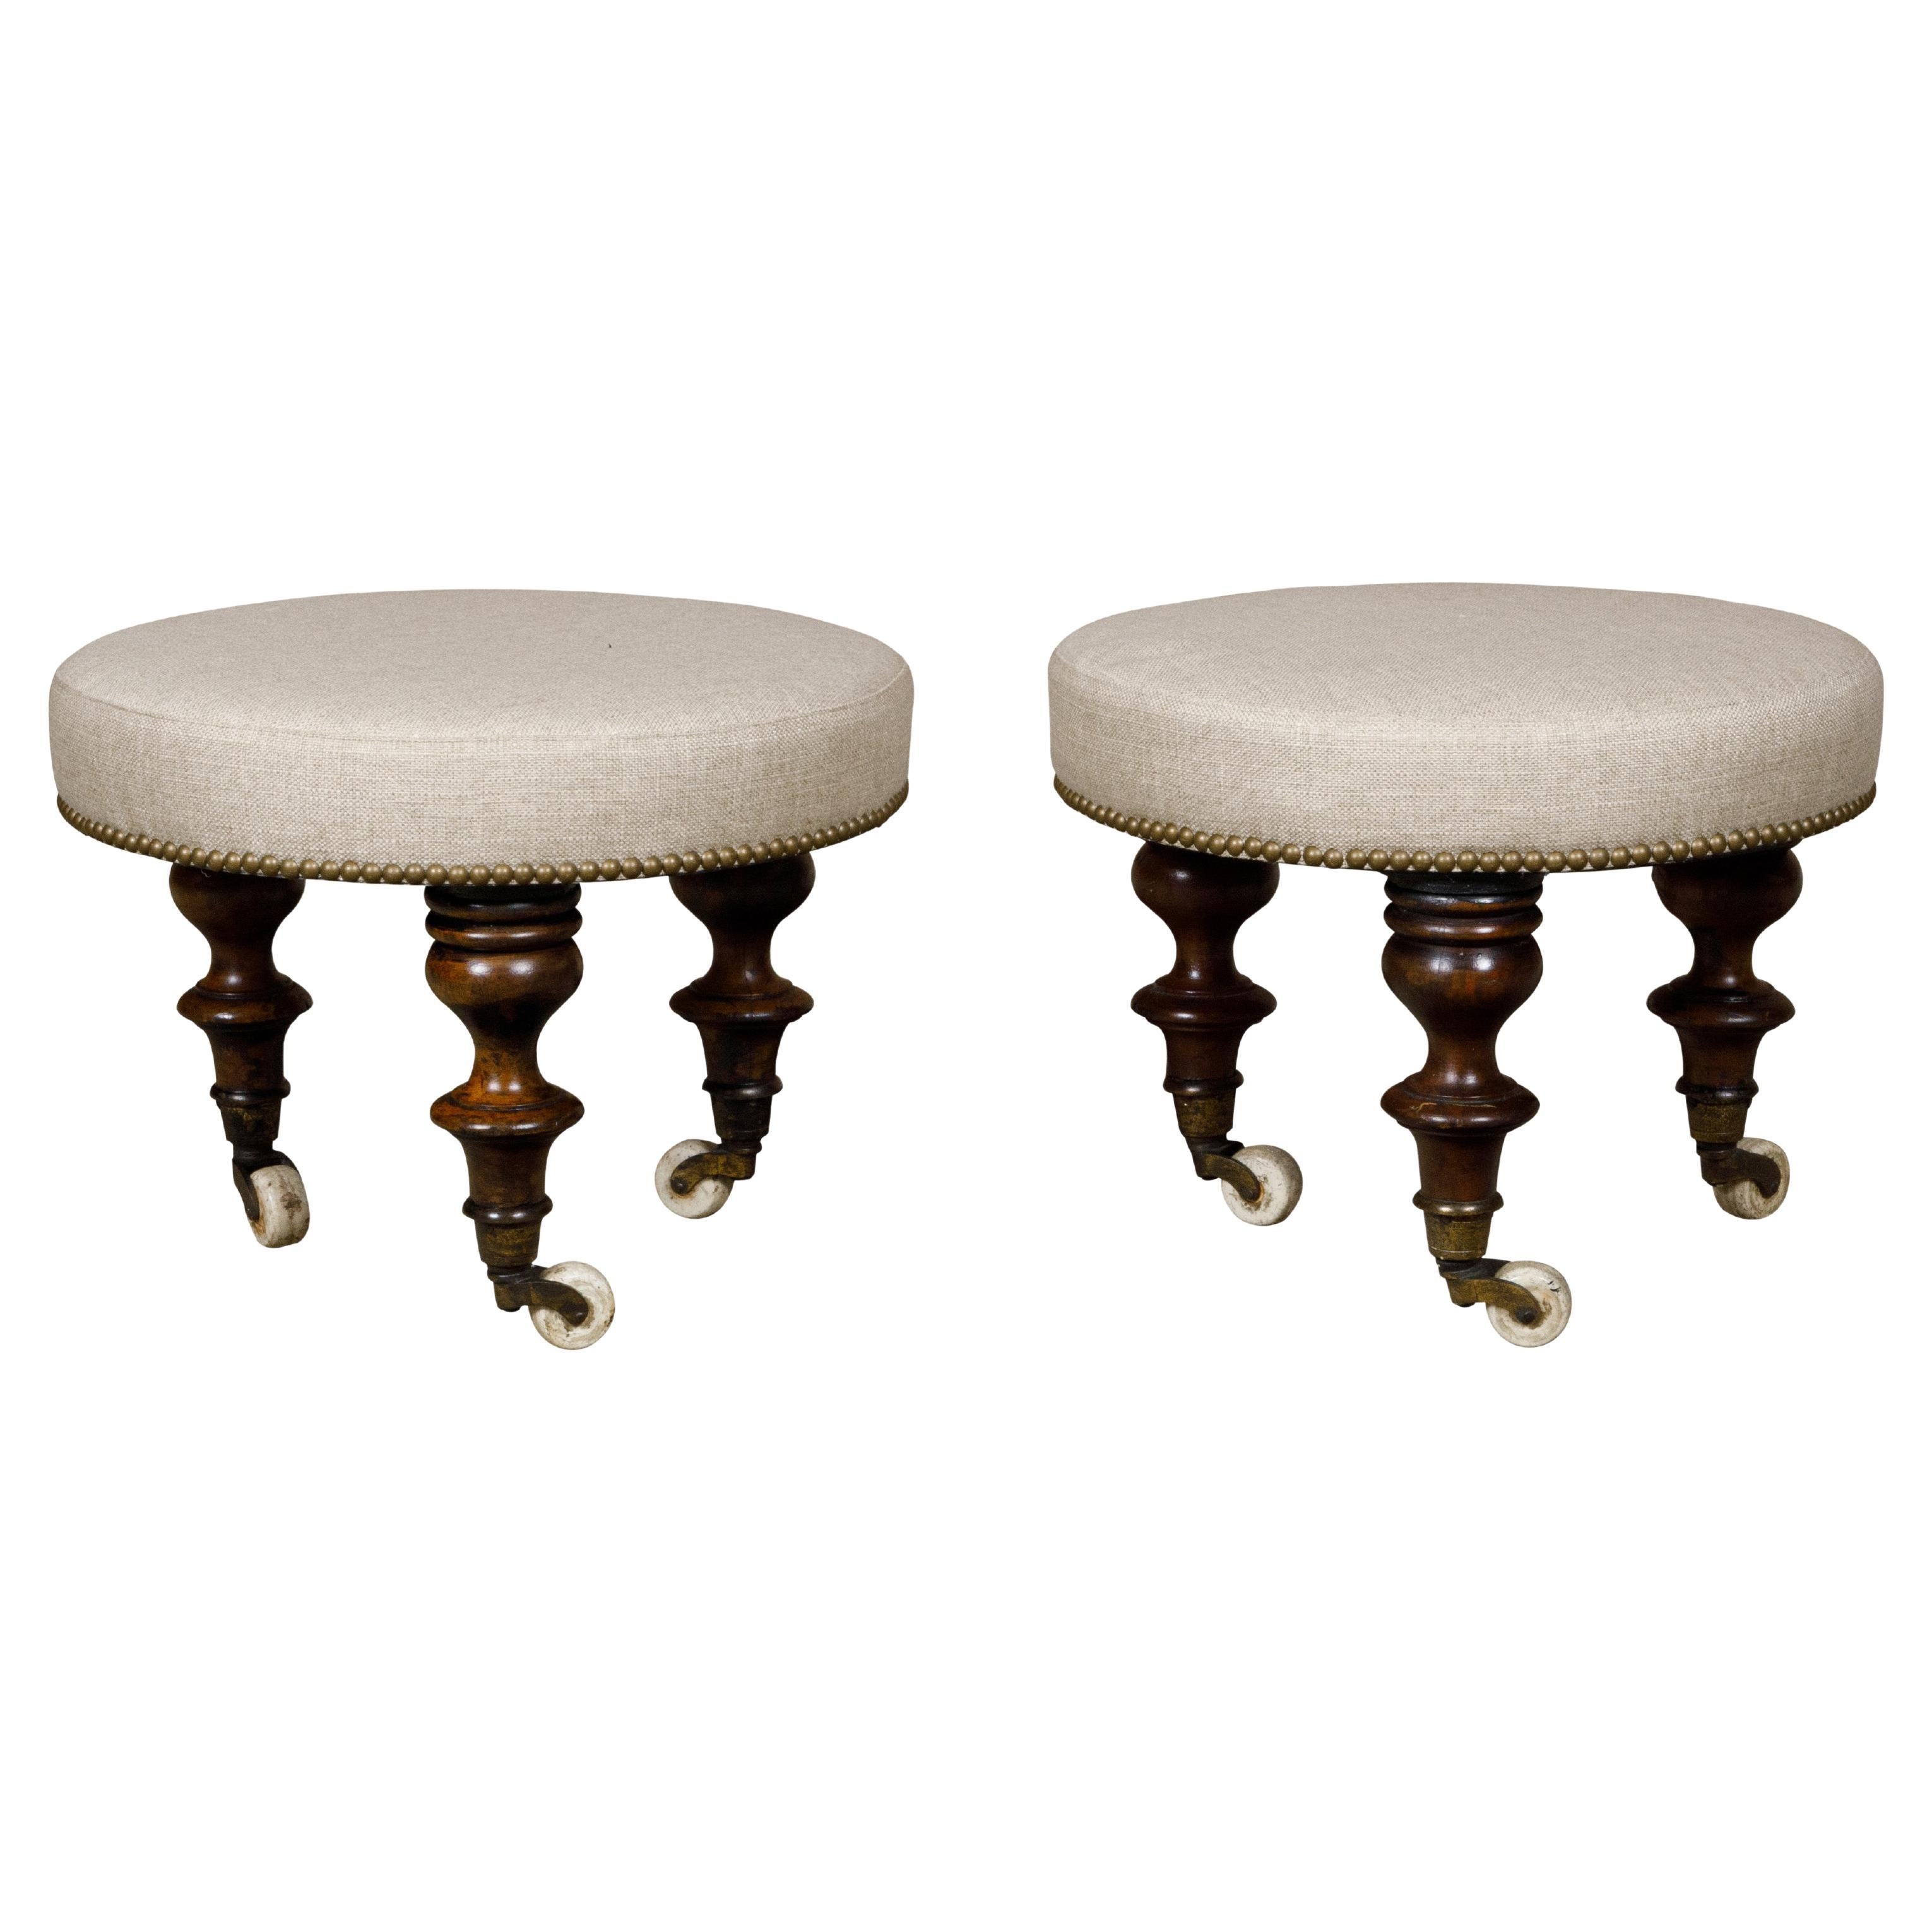 English Mahogany Stools with 19th Century Turned Legs on Casters, a Pair